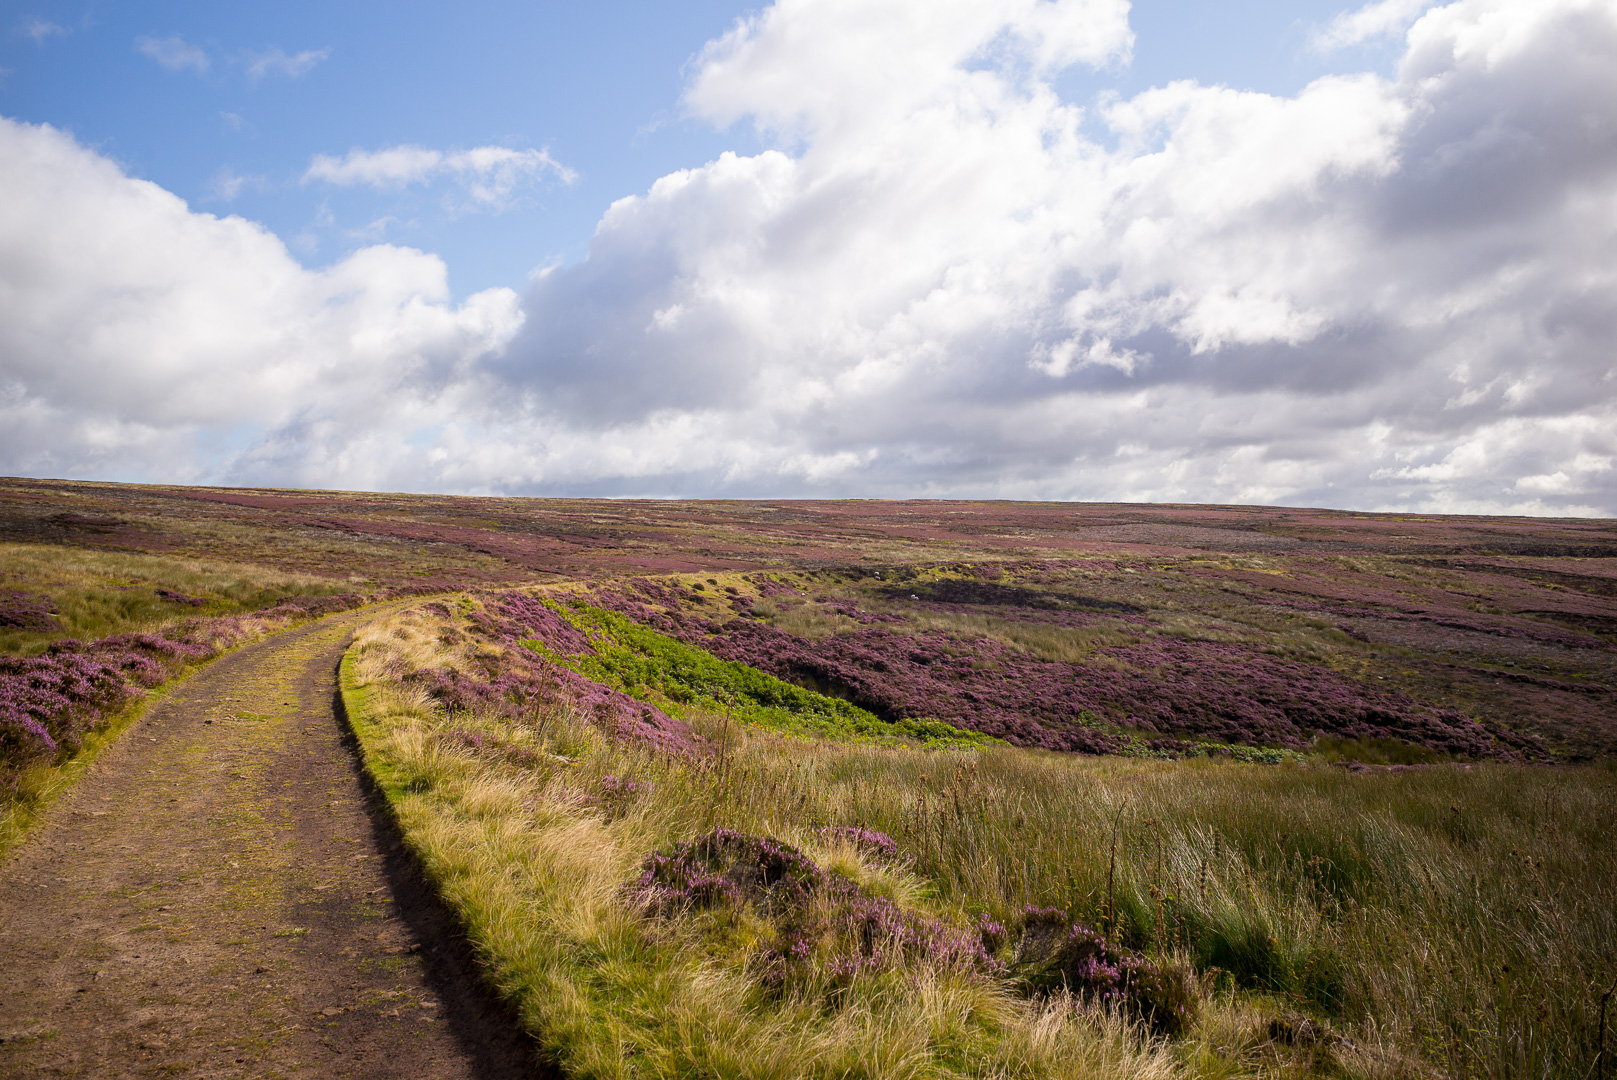 The trail uses an old railway line that was used to transport the mined ores from the moors.